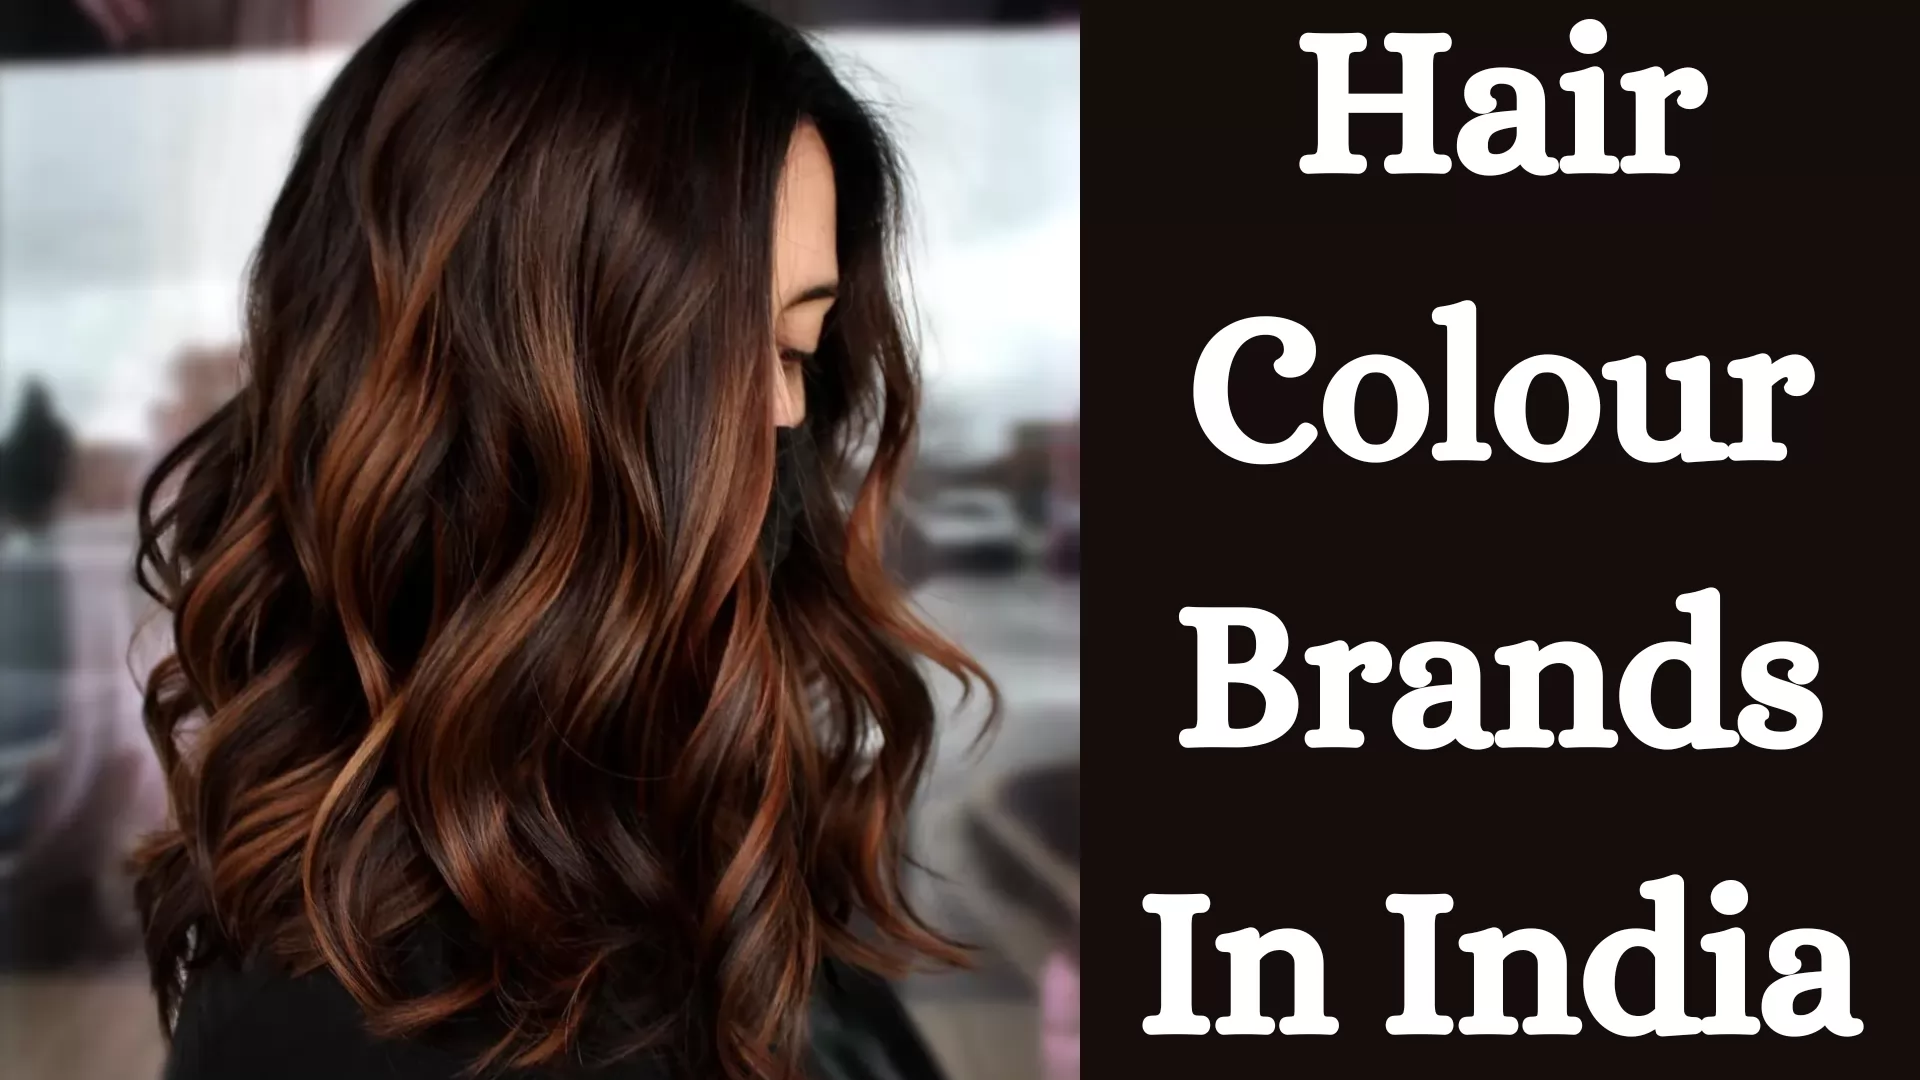 Hair Colour Brands In India